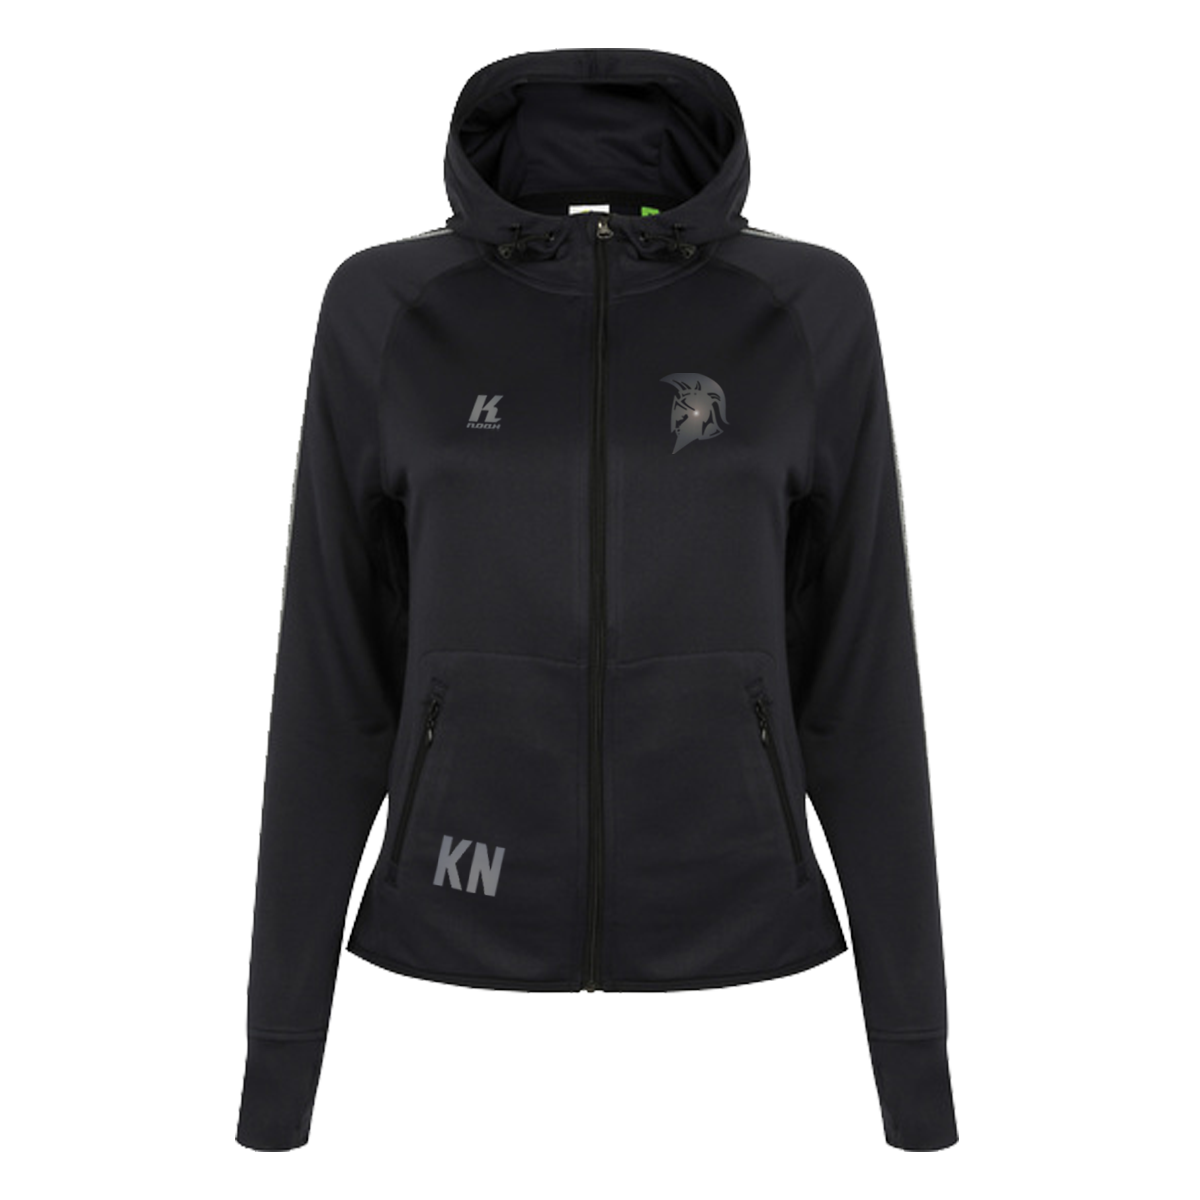 Spartans "Blackline" Womens Zip Hoodie TL551 with Initials/Playernumber